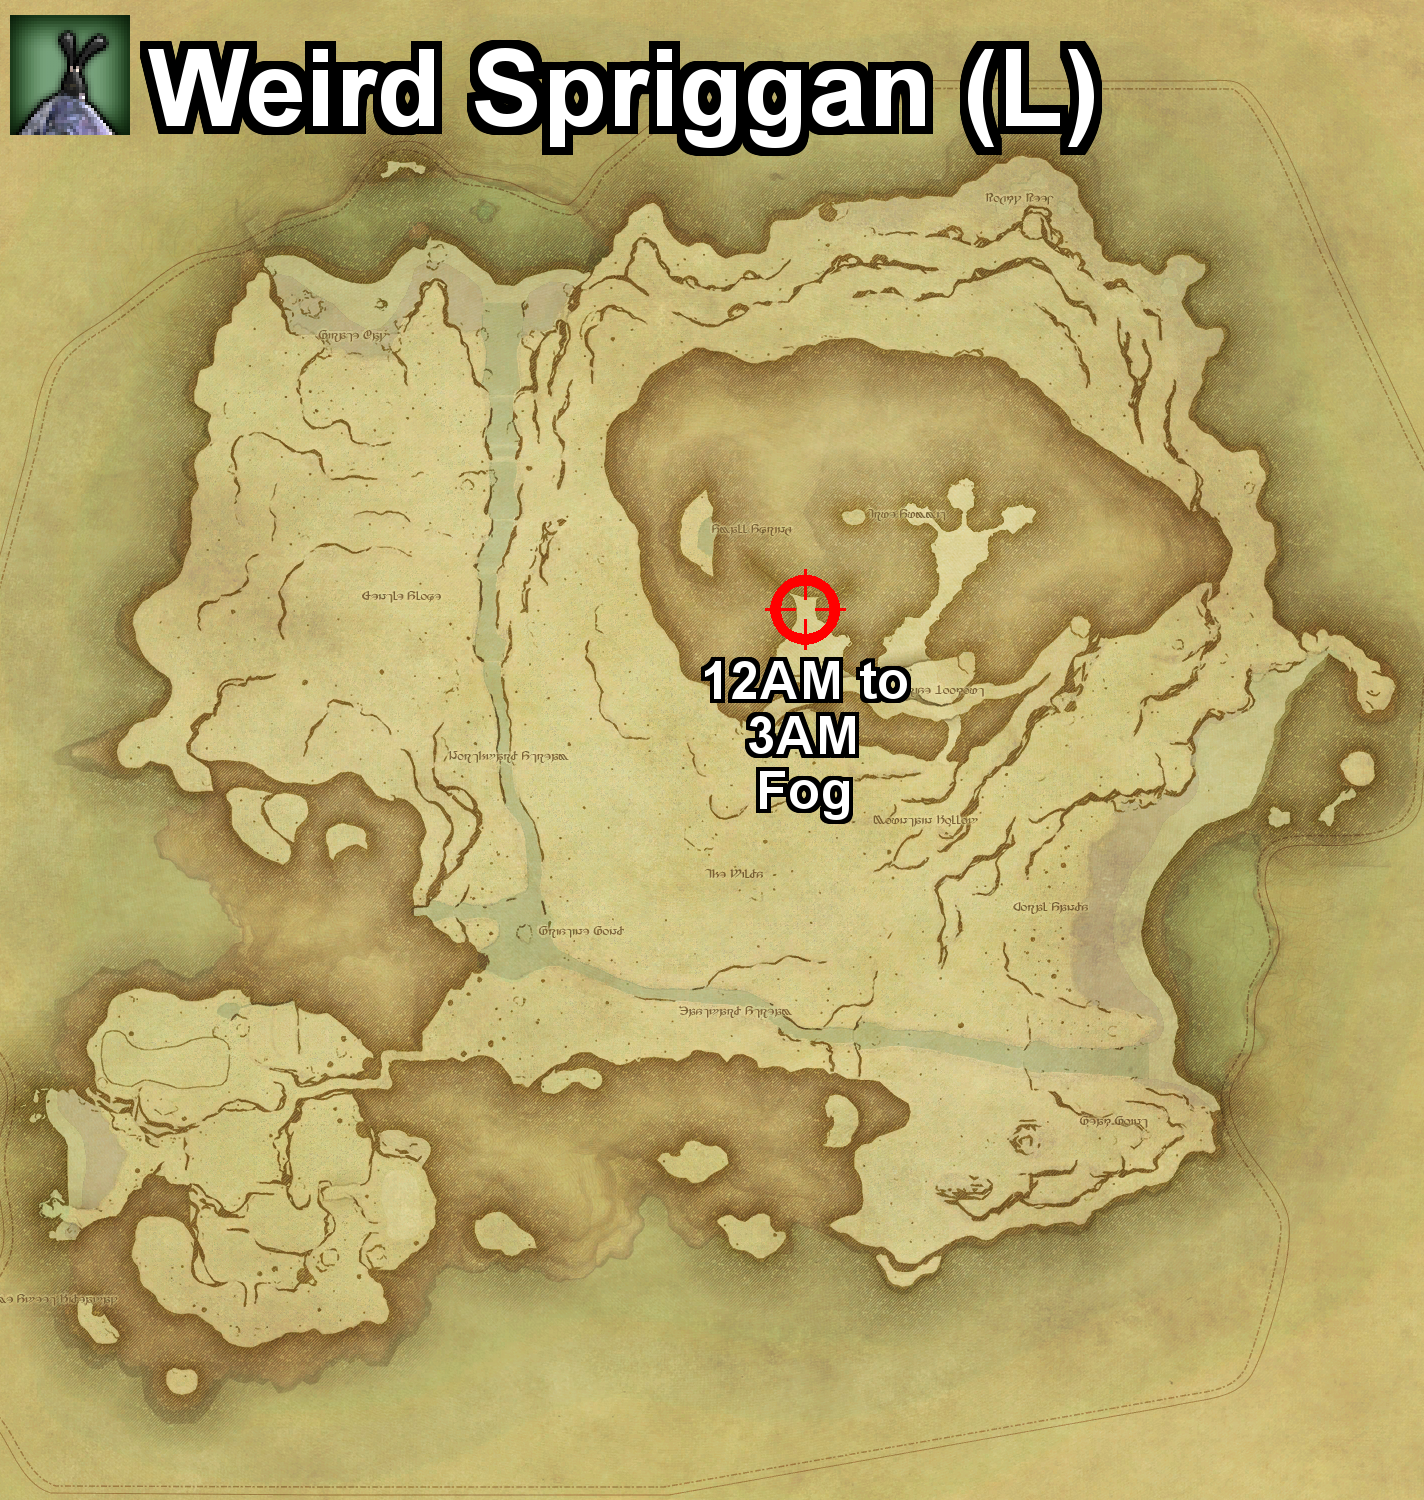 The location where the Weird Spriggan can be found, and the required conditions, on Island Sanctuary in Final Fantasy XIV.